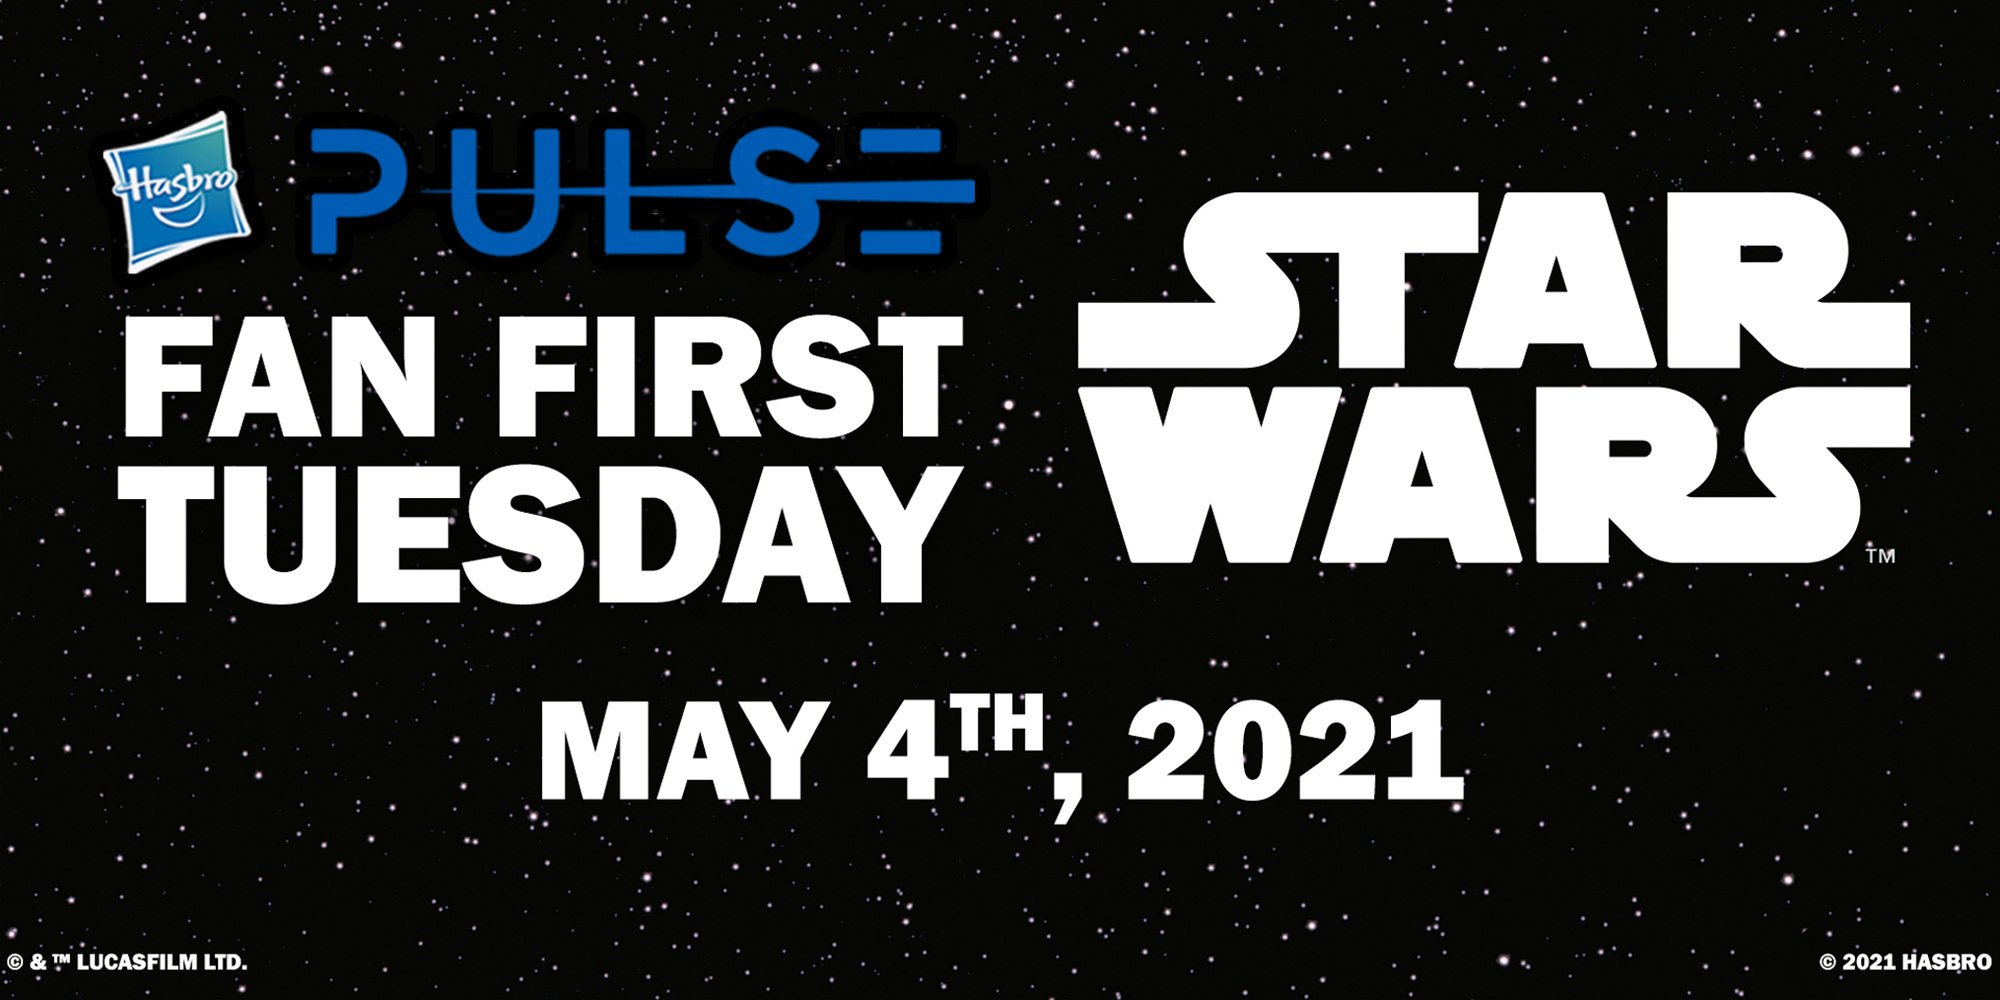 Star Wars Action Figure Announcements Coming On May 4th!